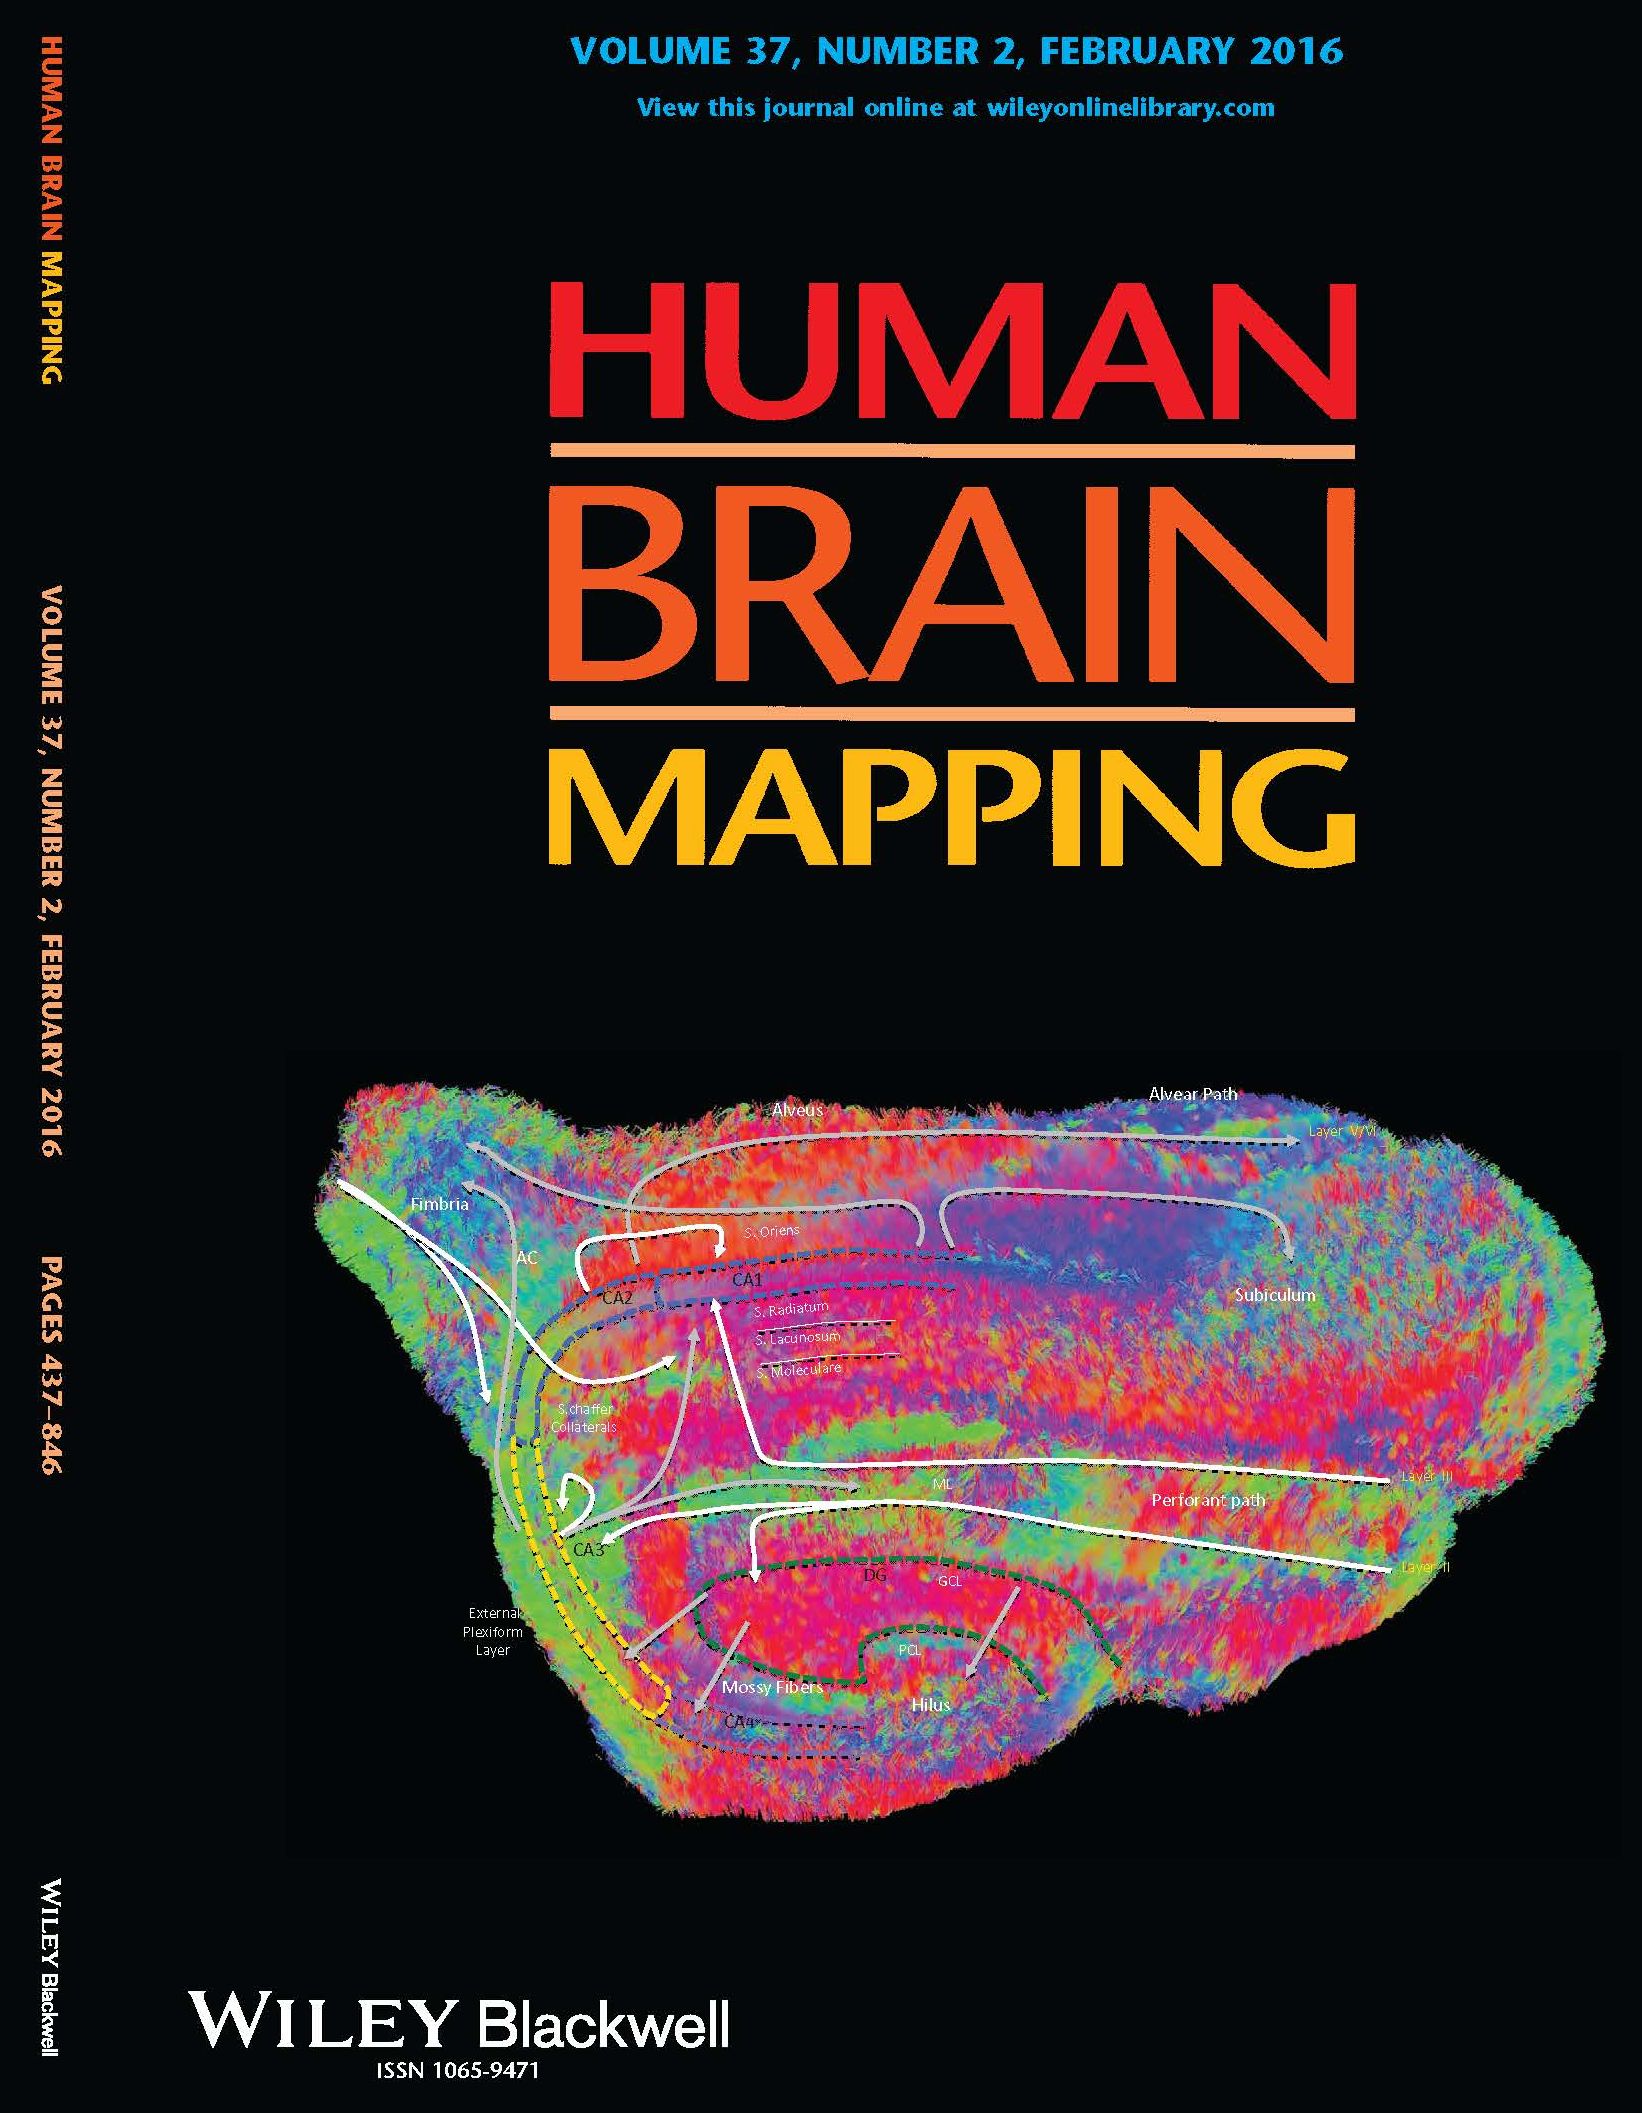 Human journals. Mapping the Human Brain. Brain Mapping.